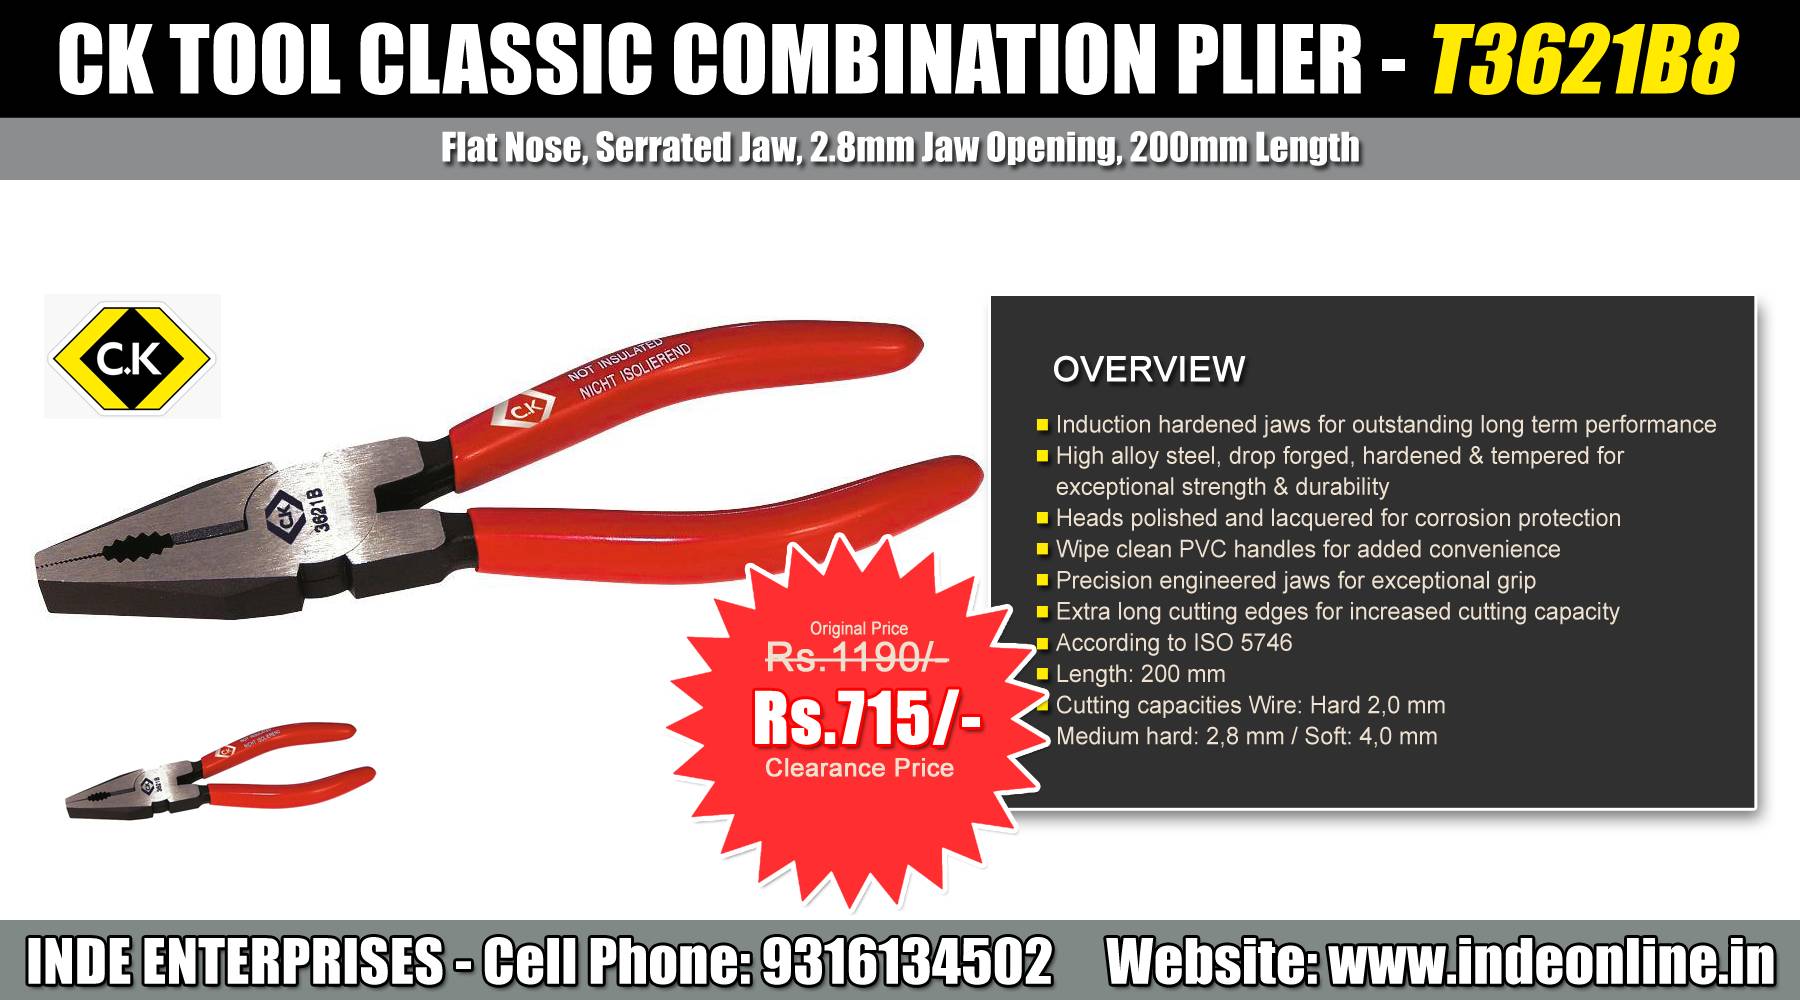 CK Tool Classic Combination Plier - T3621B8 Price Rs.715/-